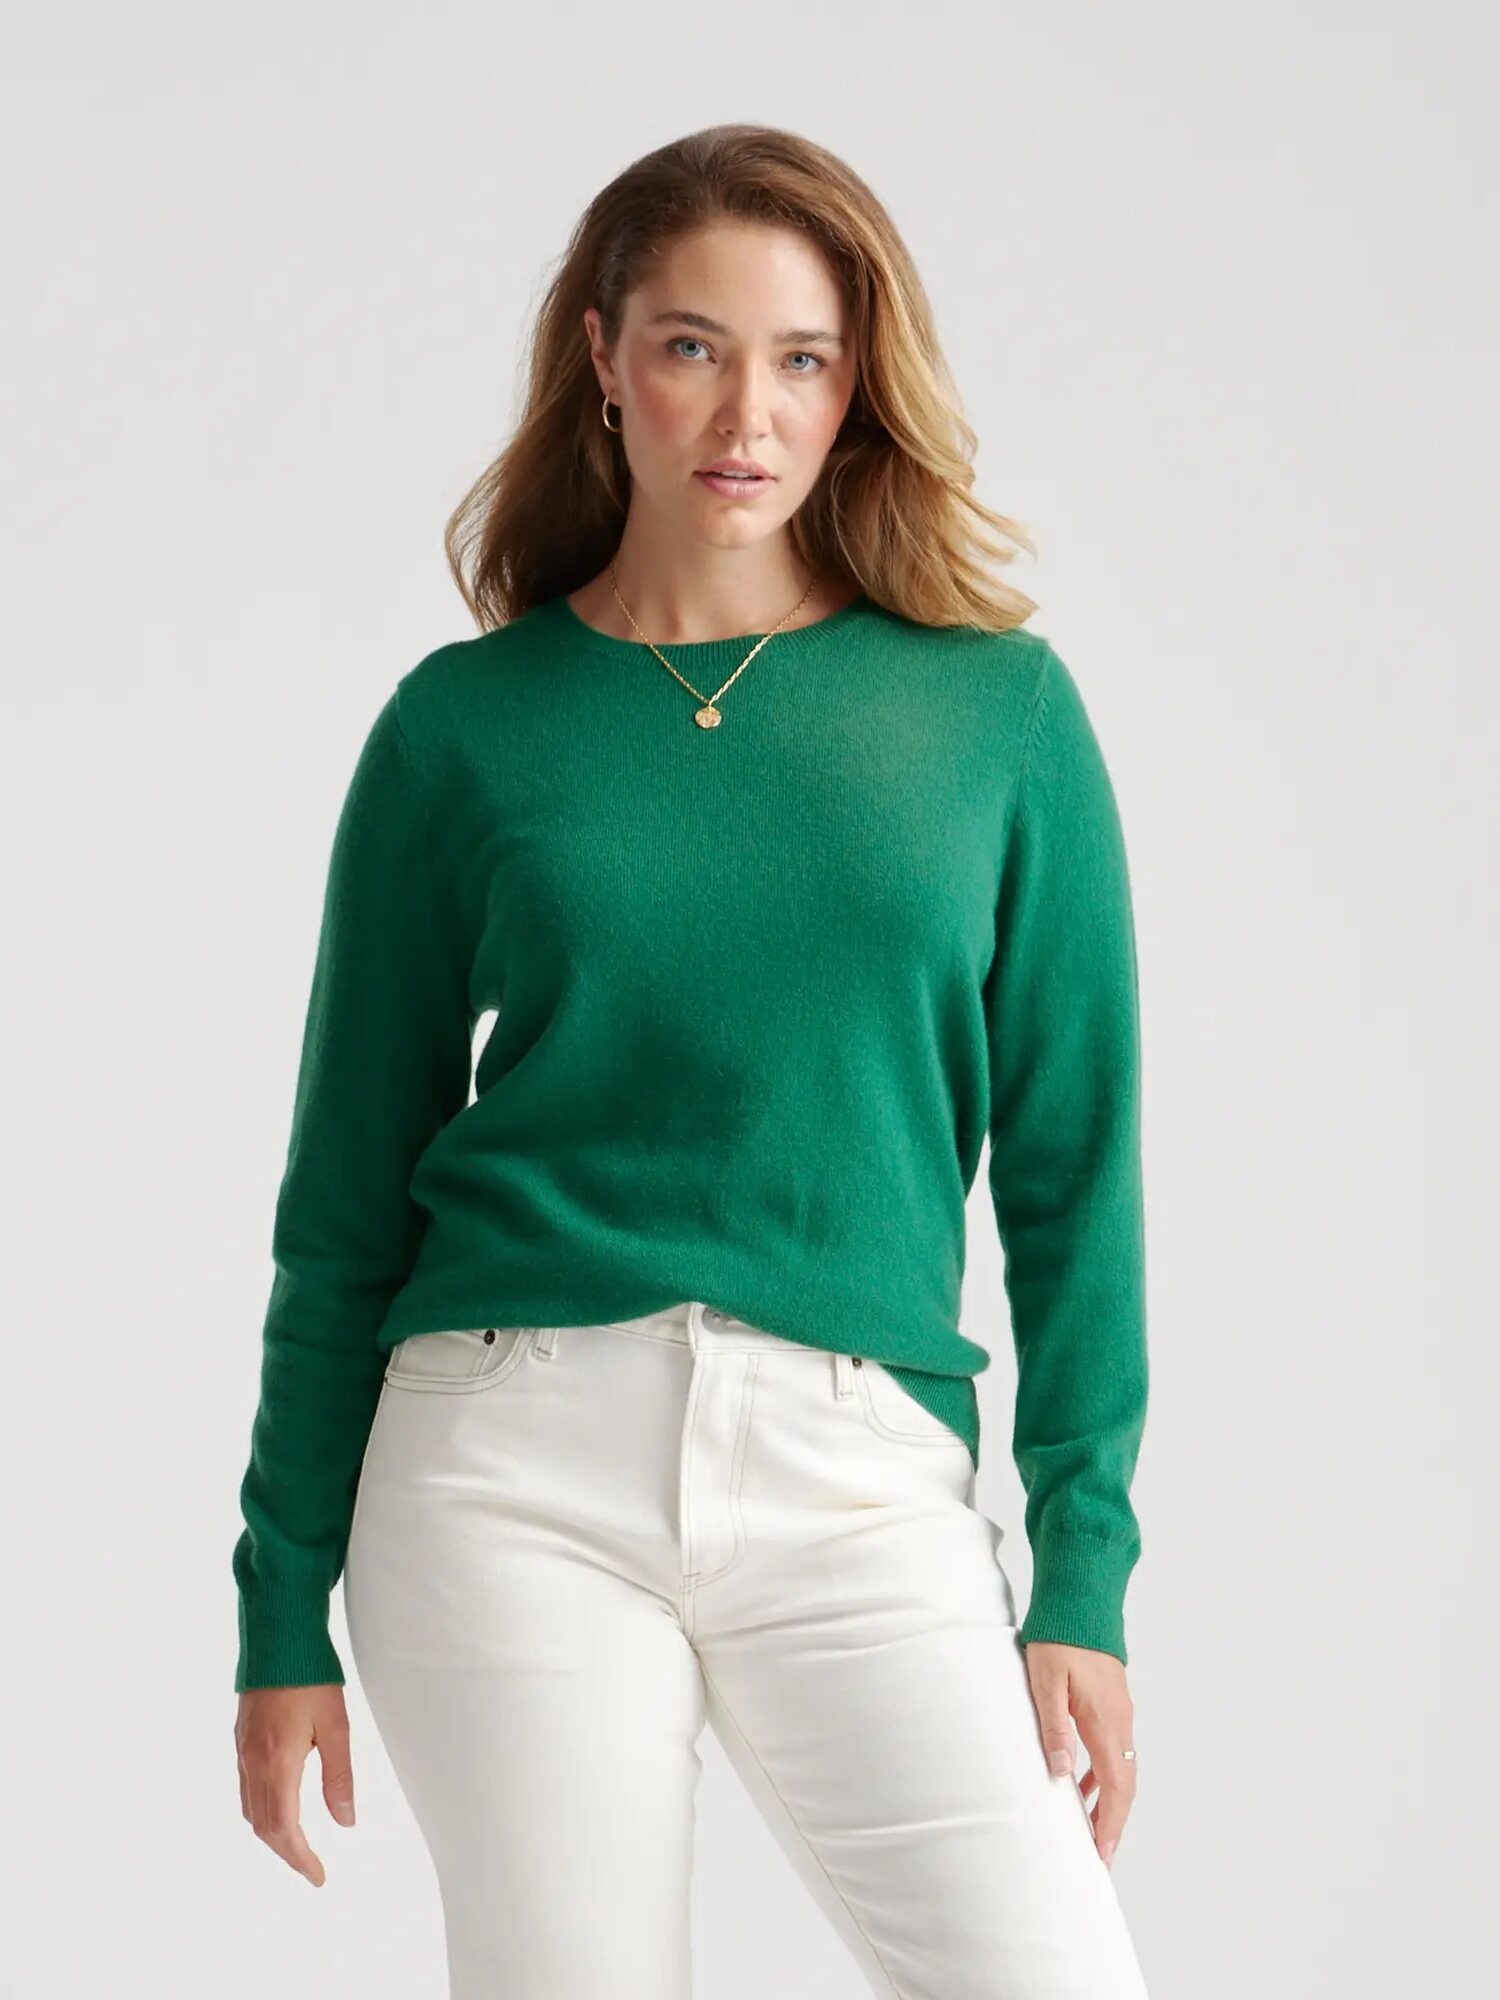 A woman in a green sweater and white pants against a plain background, looking directly at the camera.